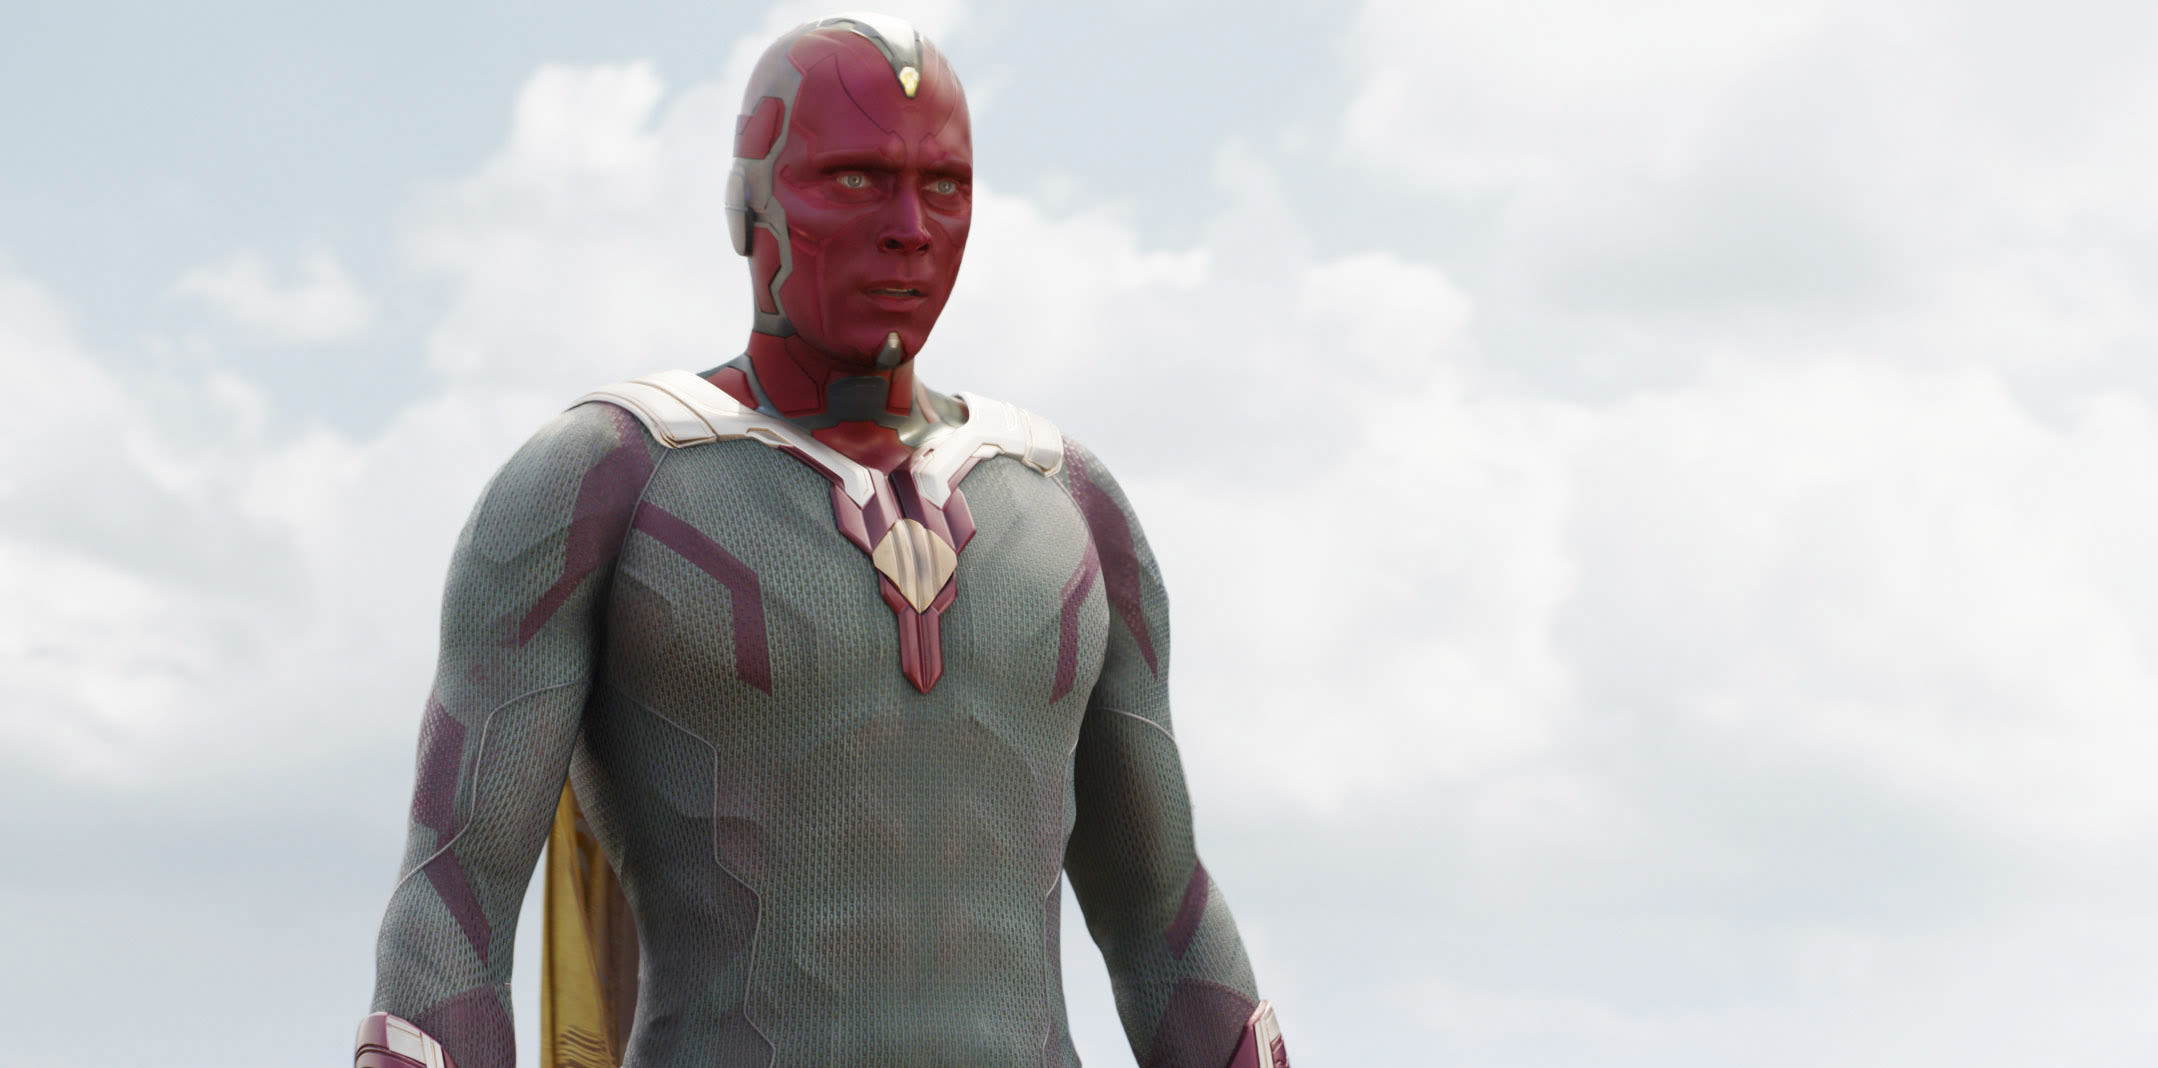 Marvel Vision Series Greenlit At Disney+ With Paul Bettany To Reprise Role